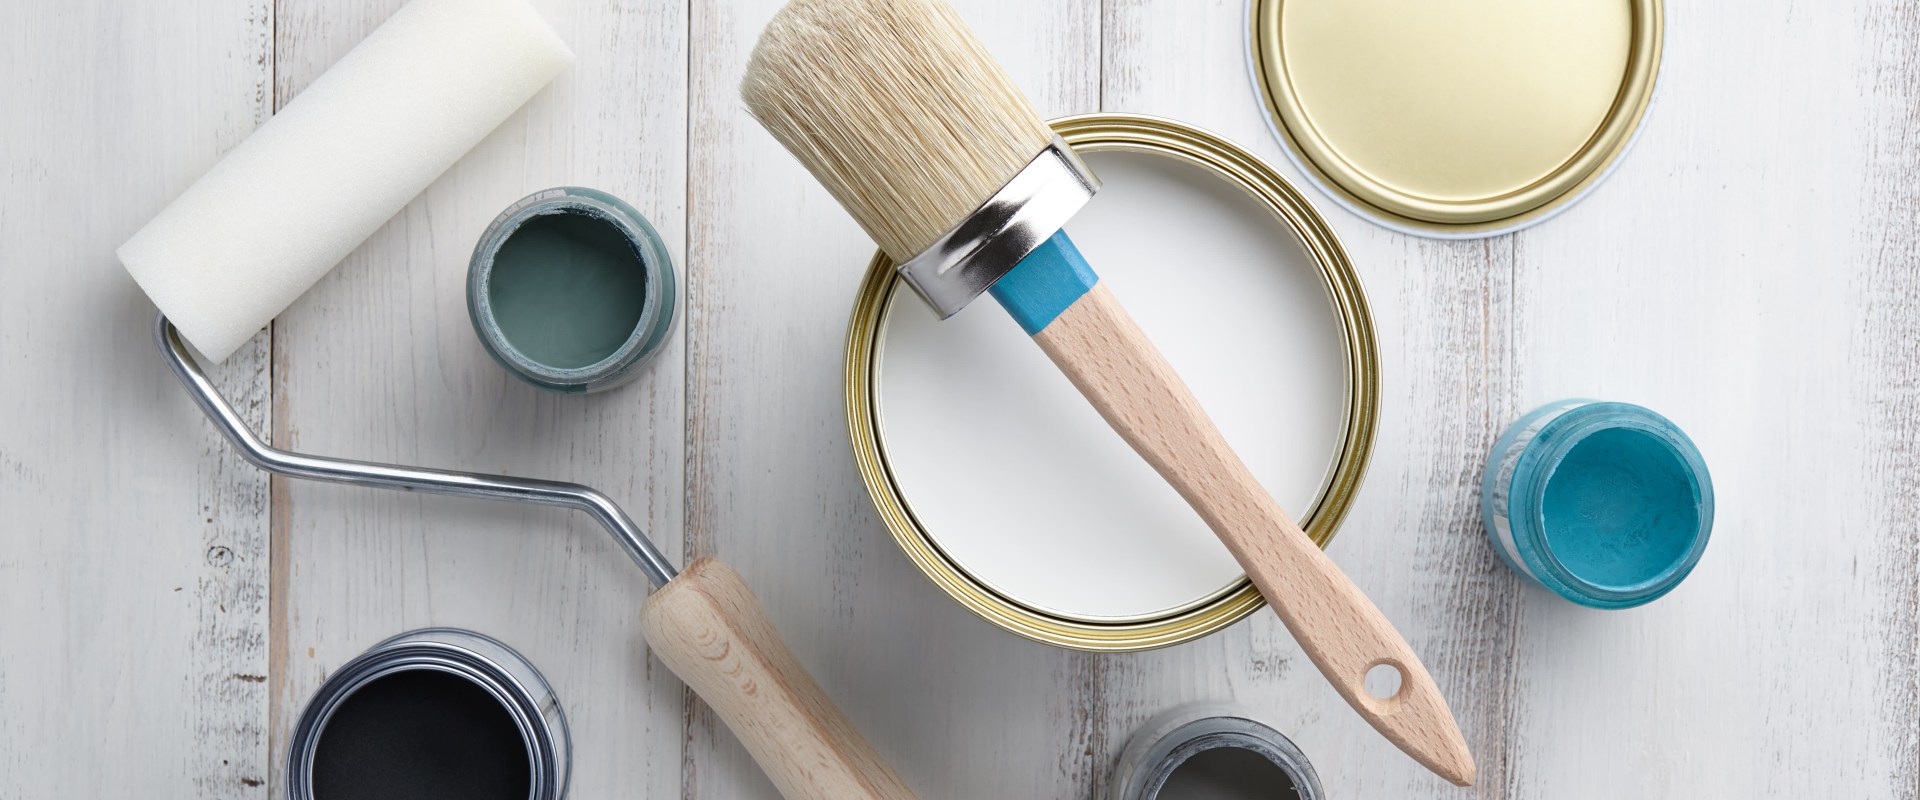 Painting Repair Services: An Overview of What You Need to Know